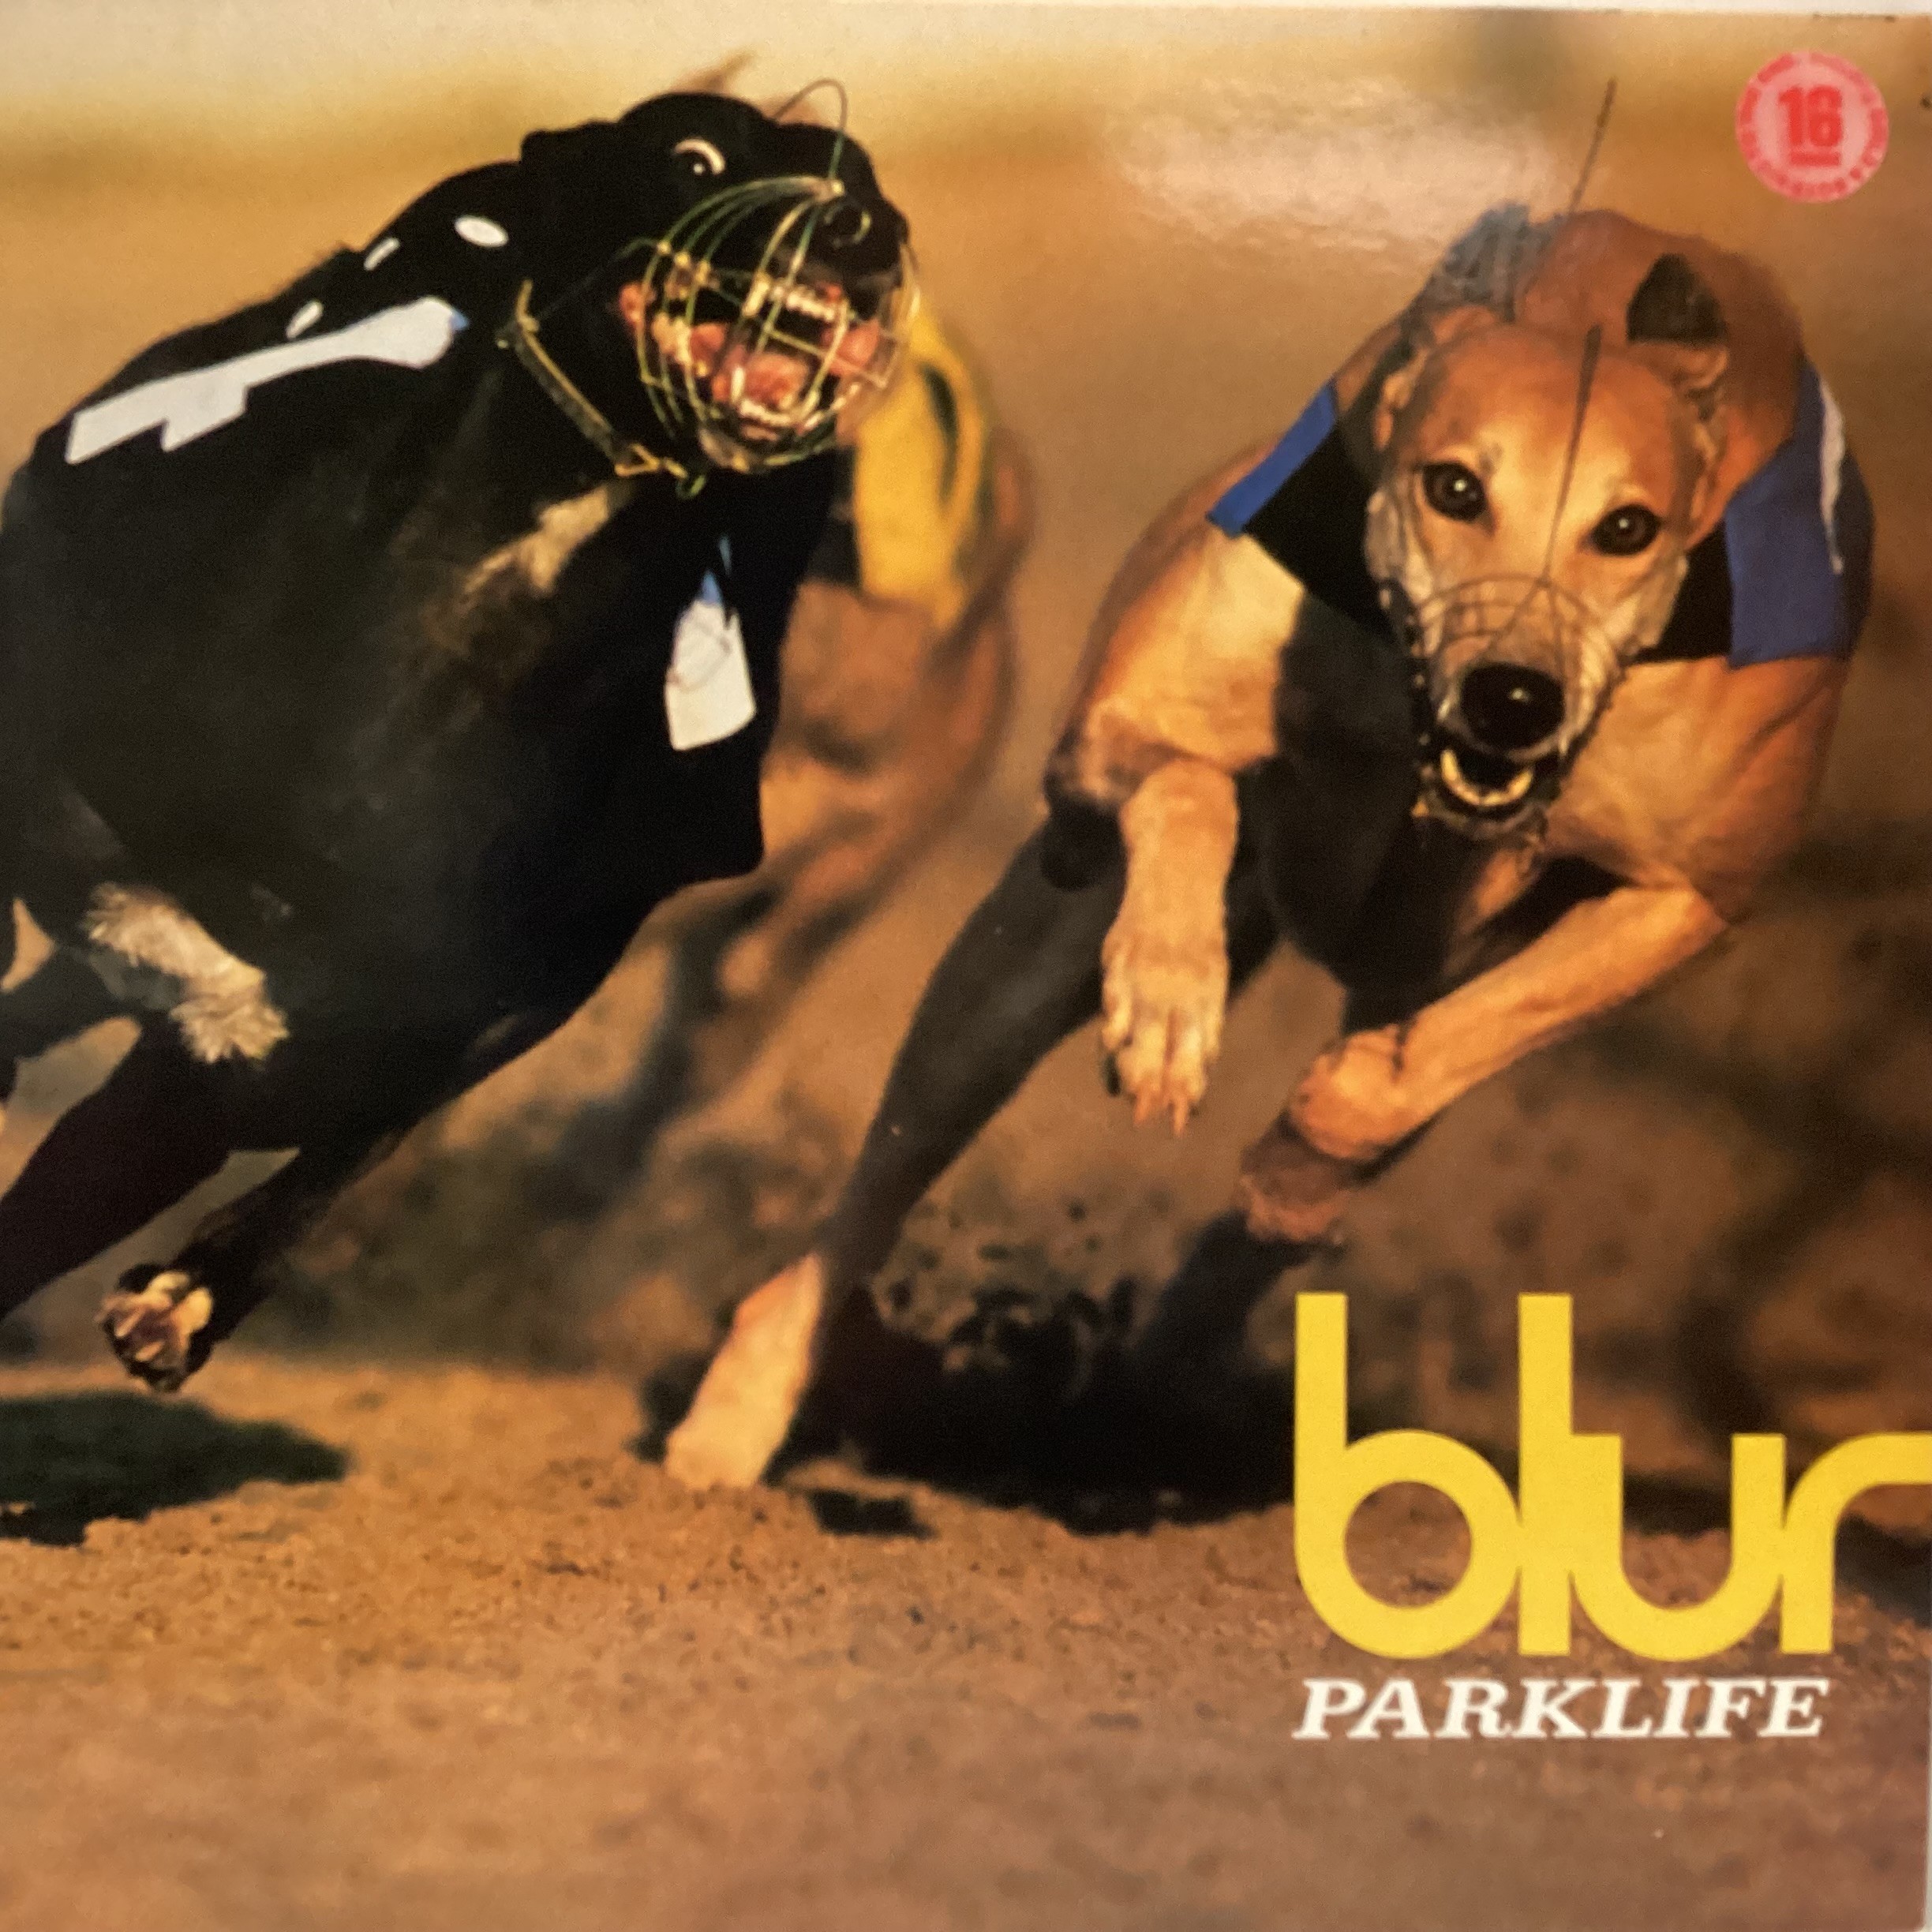 1st PRESS BLUR VINYL ALBUM ‘PARKLIFE’. Released in 1994 on Food Records FOODLP 10 and found here